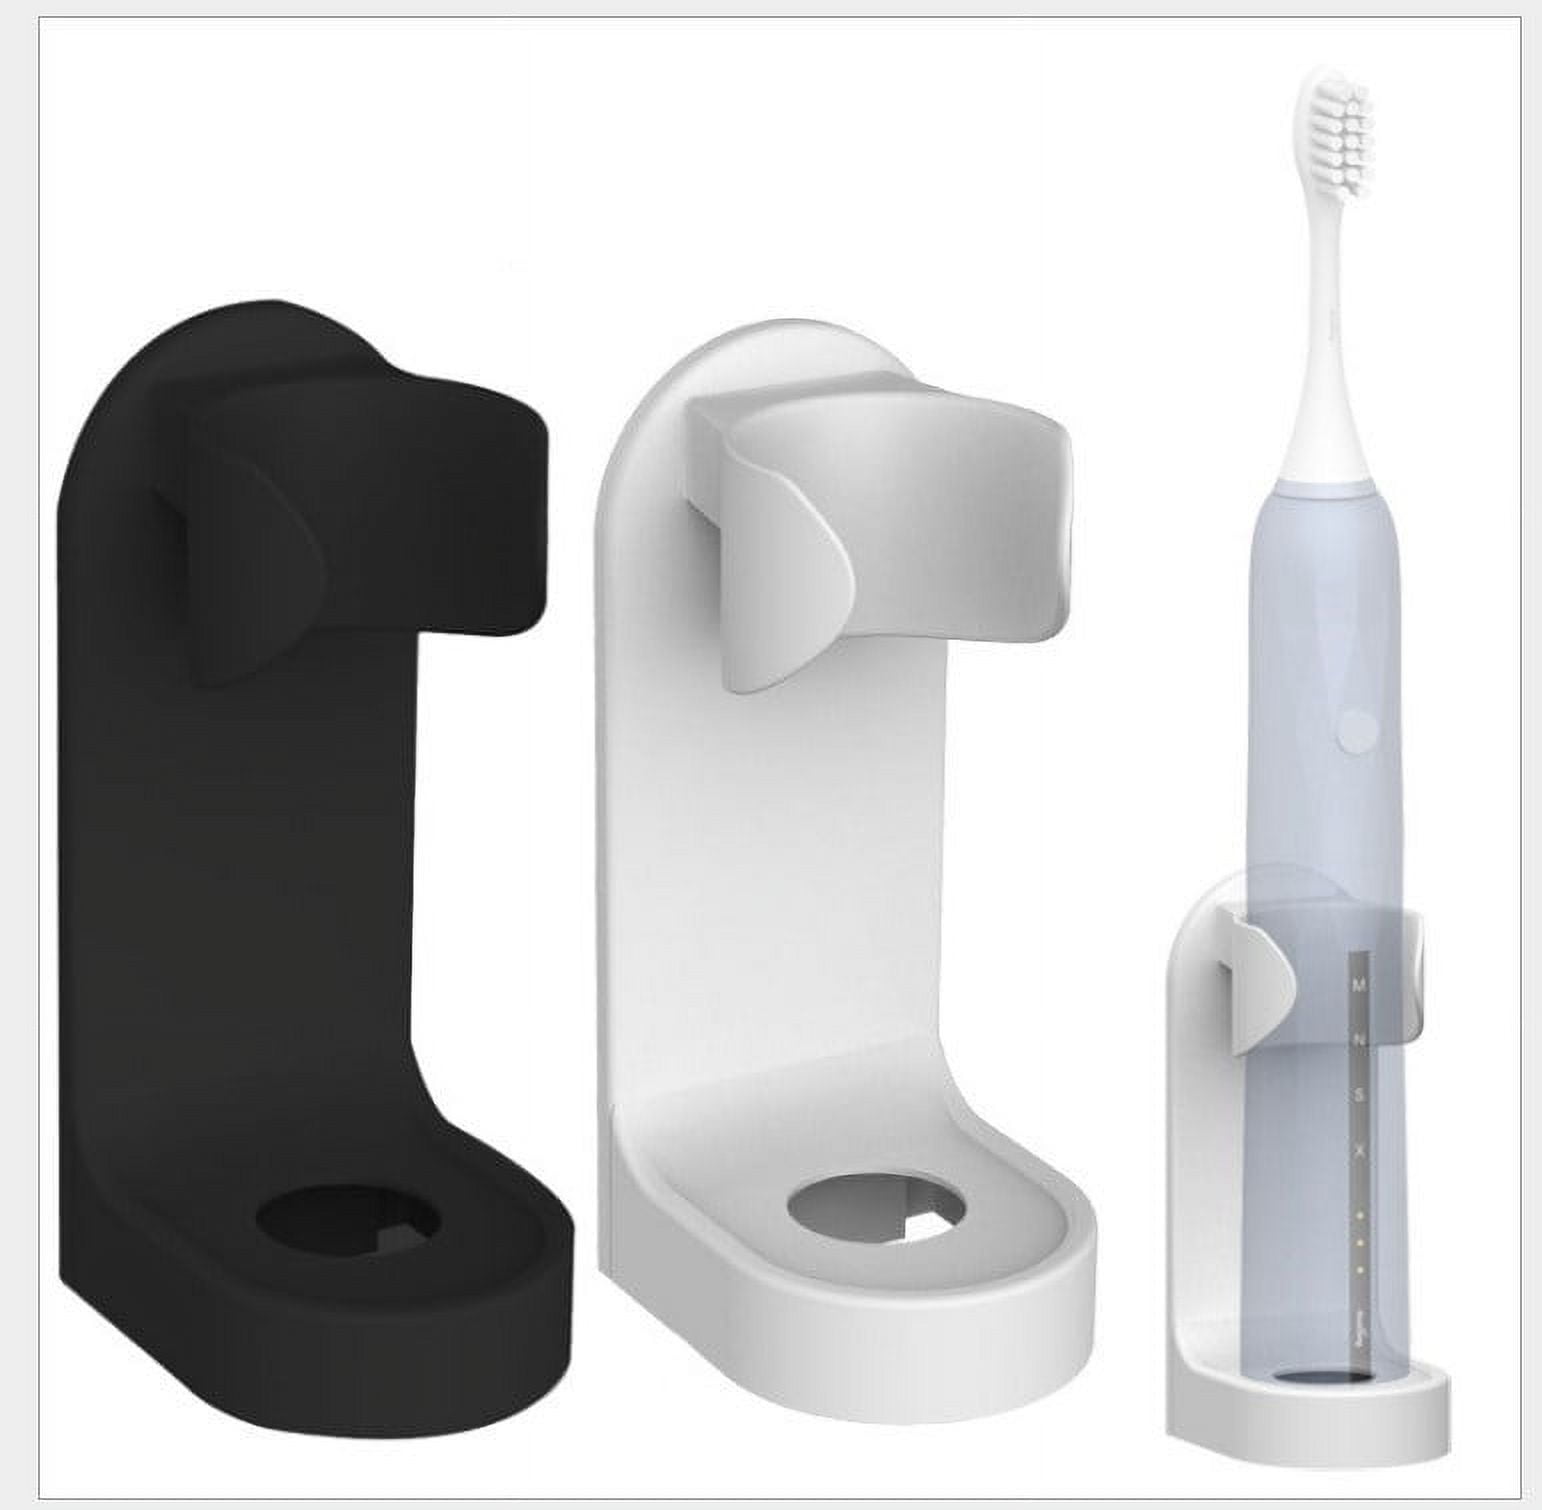 Toothbrush Holders For Bathroomskids Electric Toothbrush Holder With 2 Cups  Setw